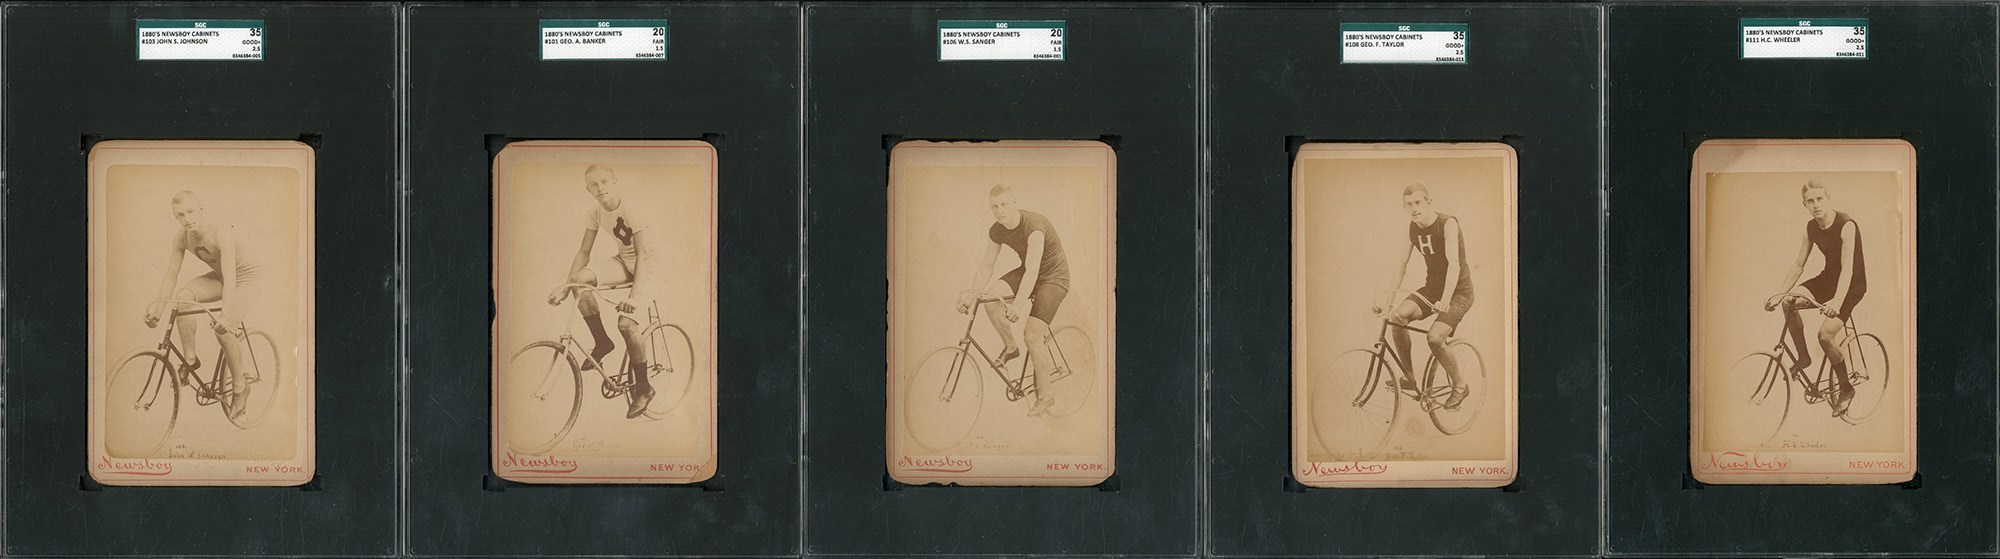 1880s Newsboy Cabinets Collection of 5 Cyclists - All SGC Graded